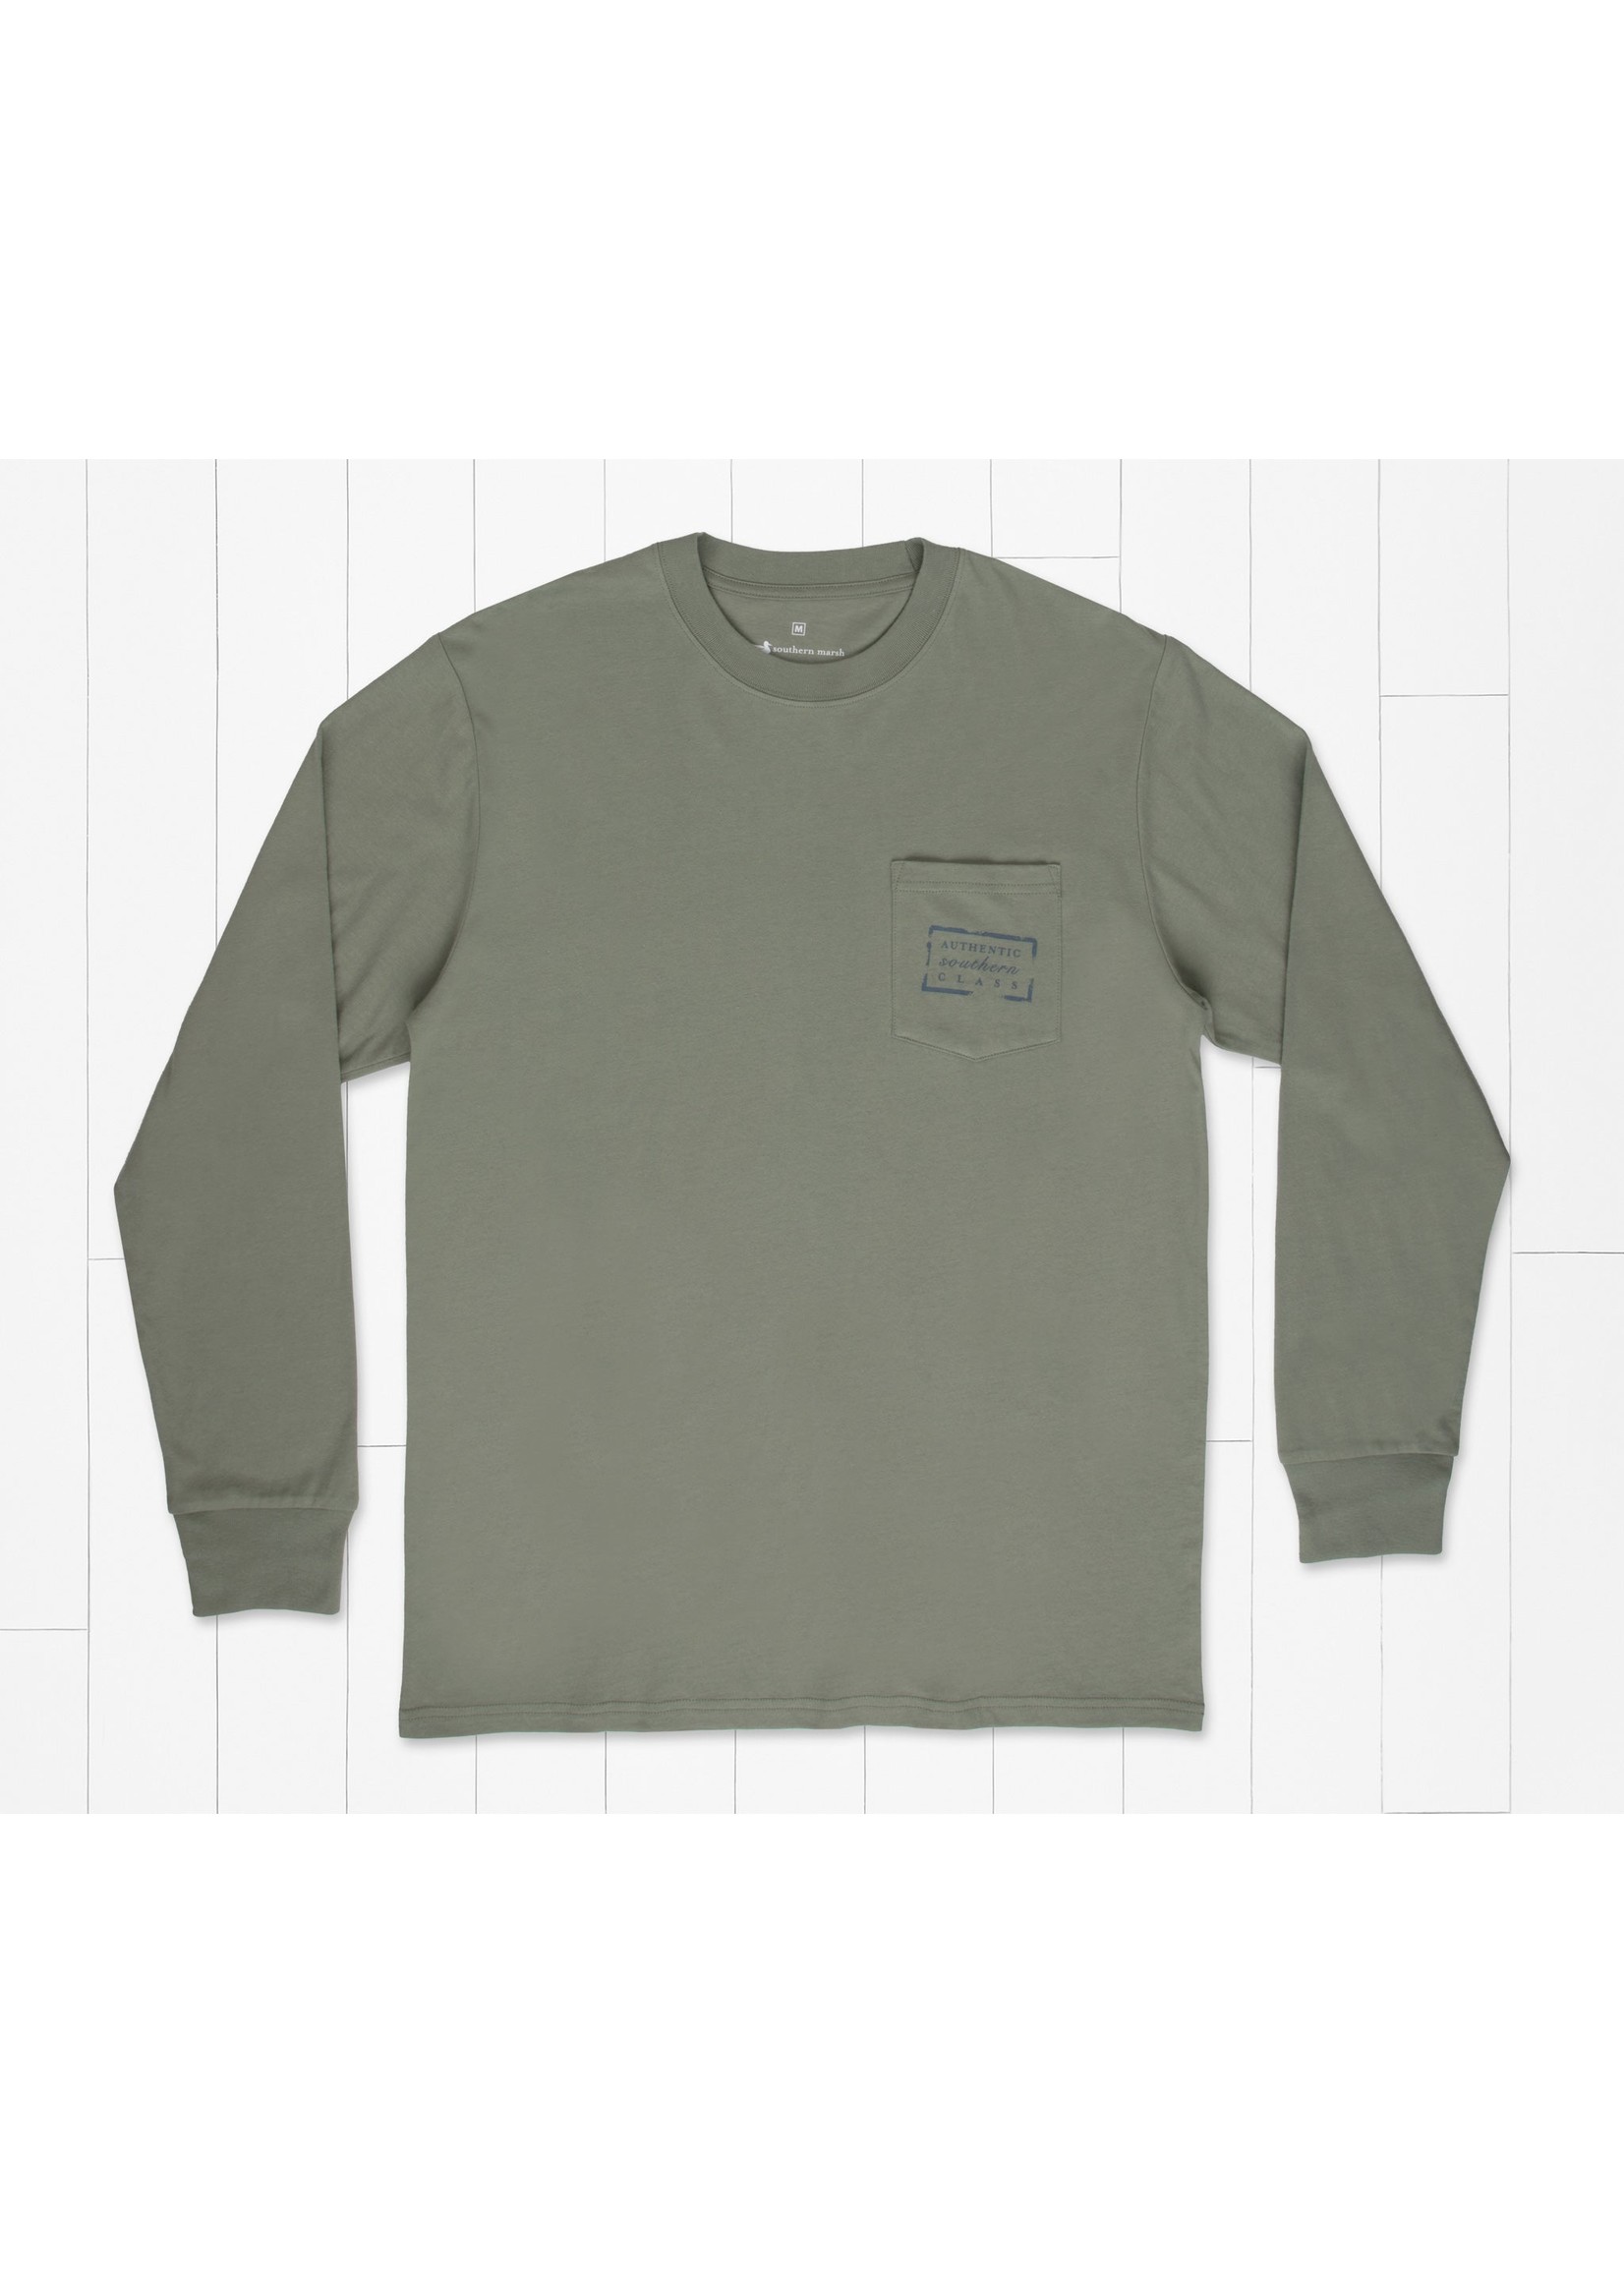 Southern Marsh Authentic Rewind Long Sleeve